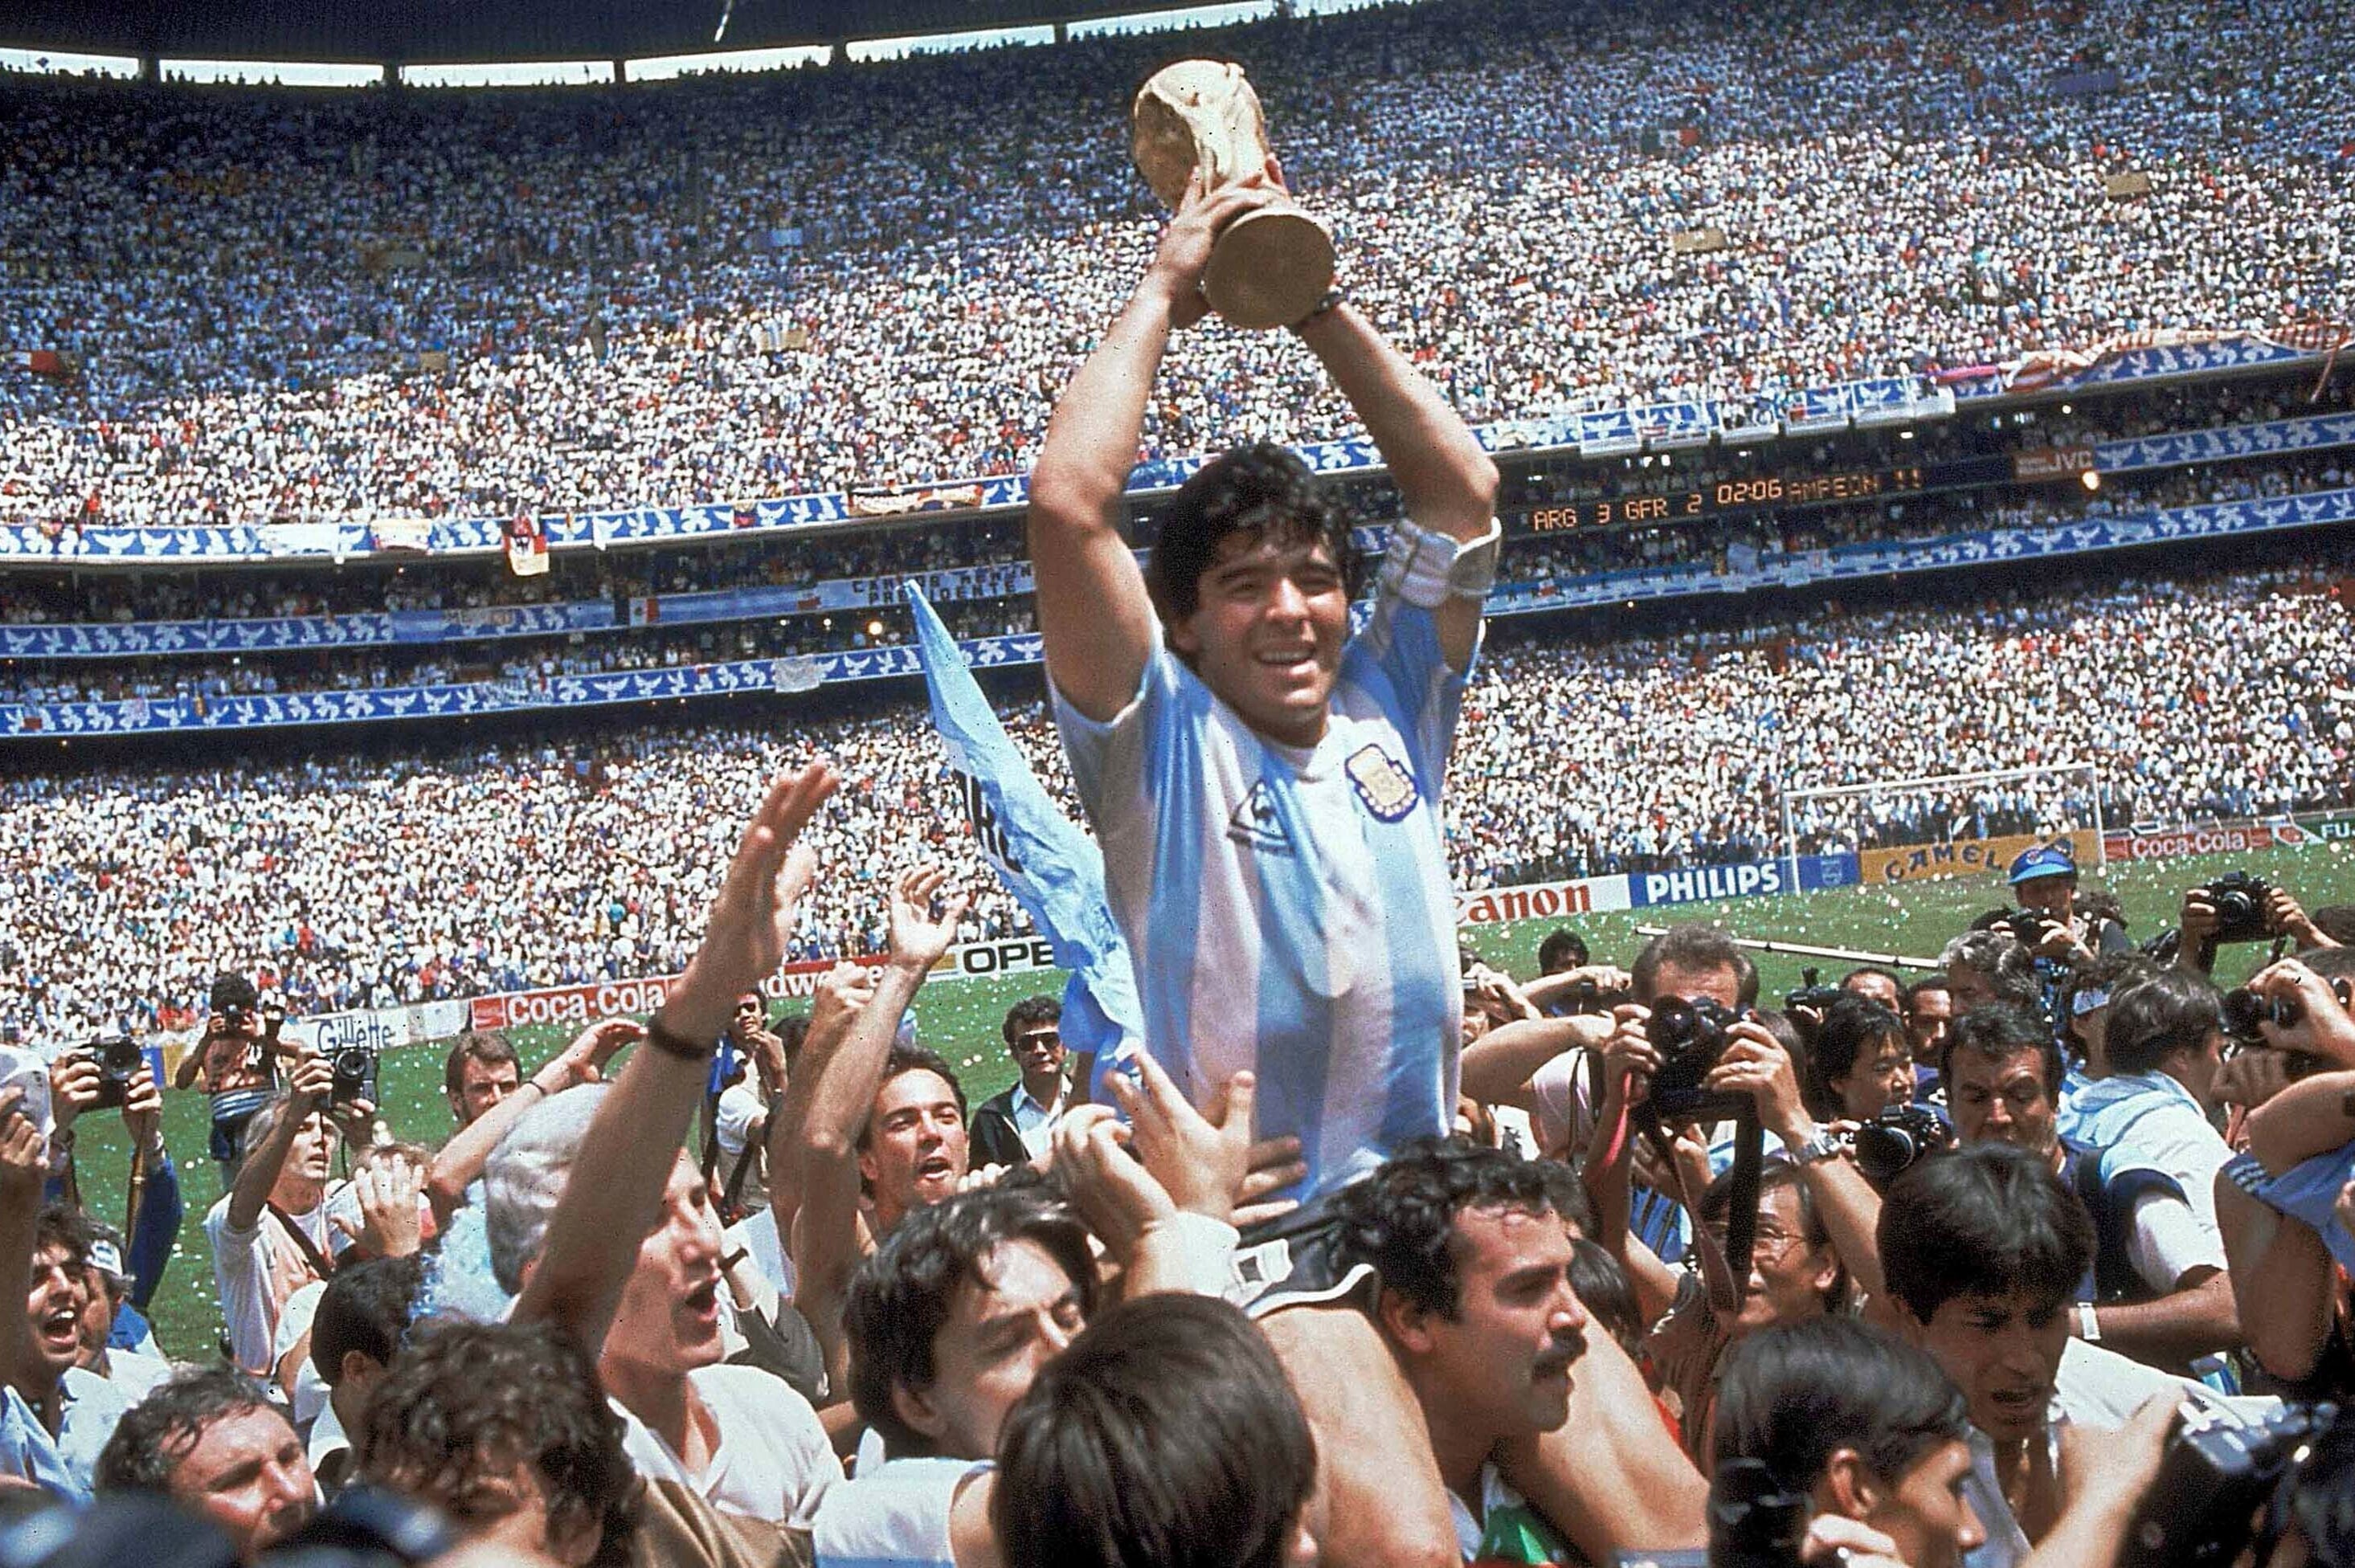 Maradona holds up the World Cup after winning the 1986 final in Mexico